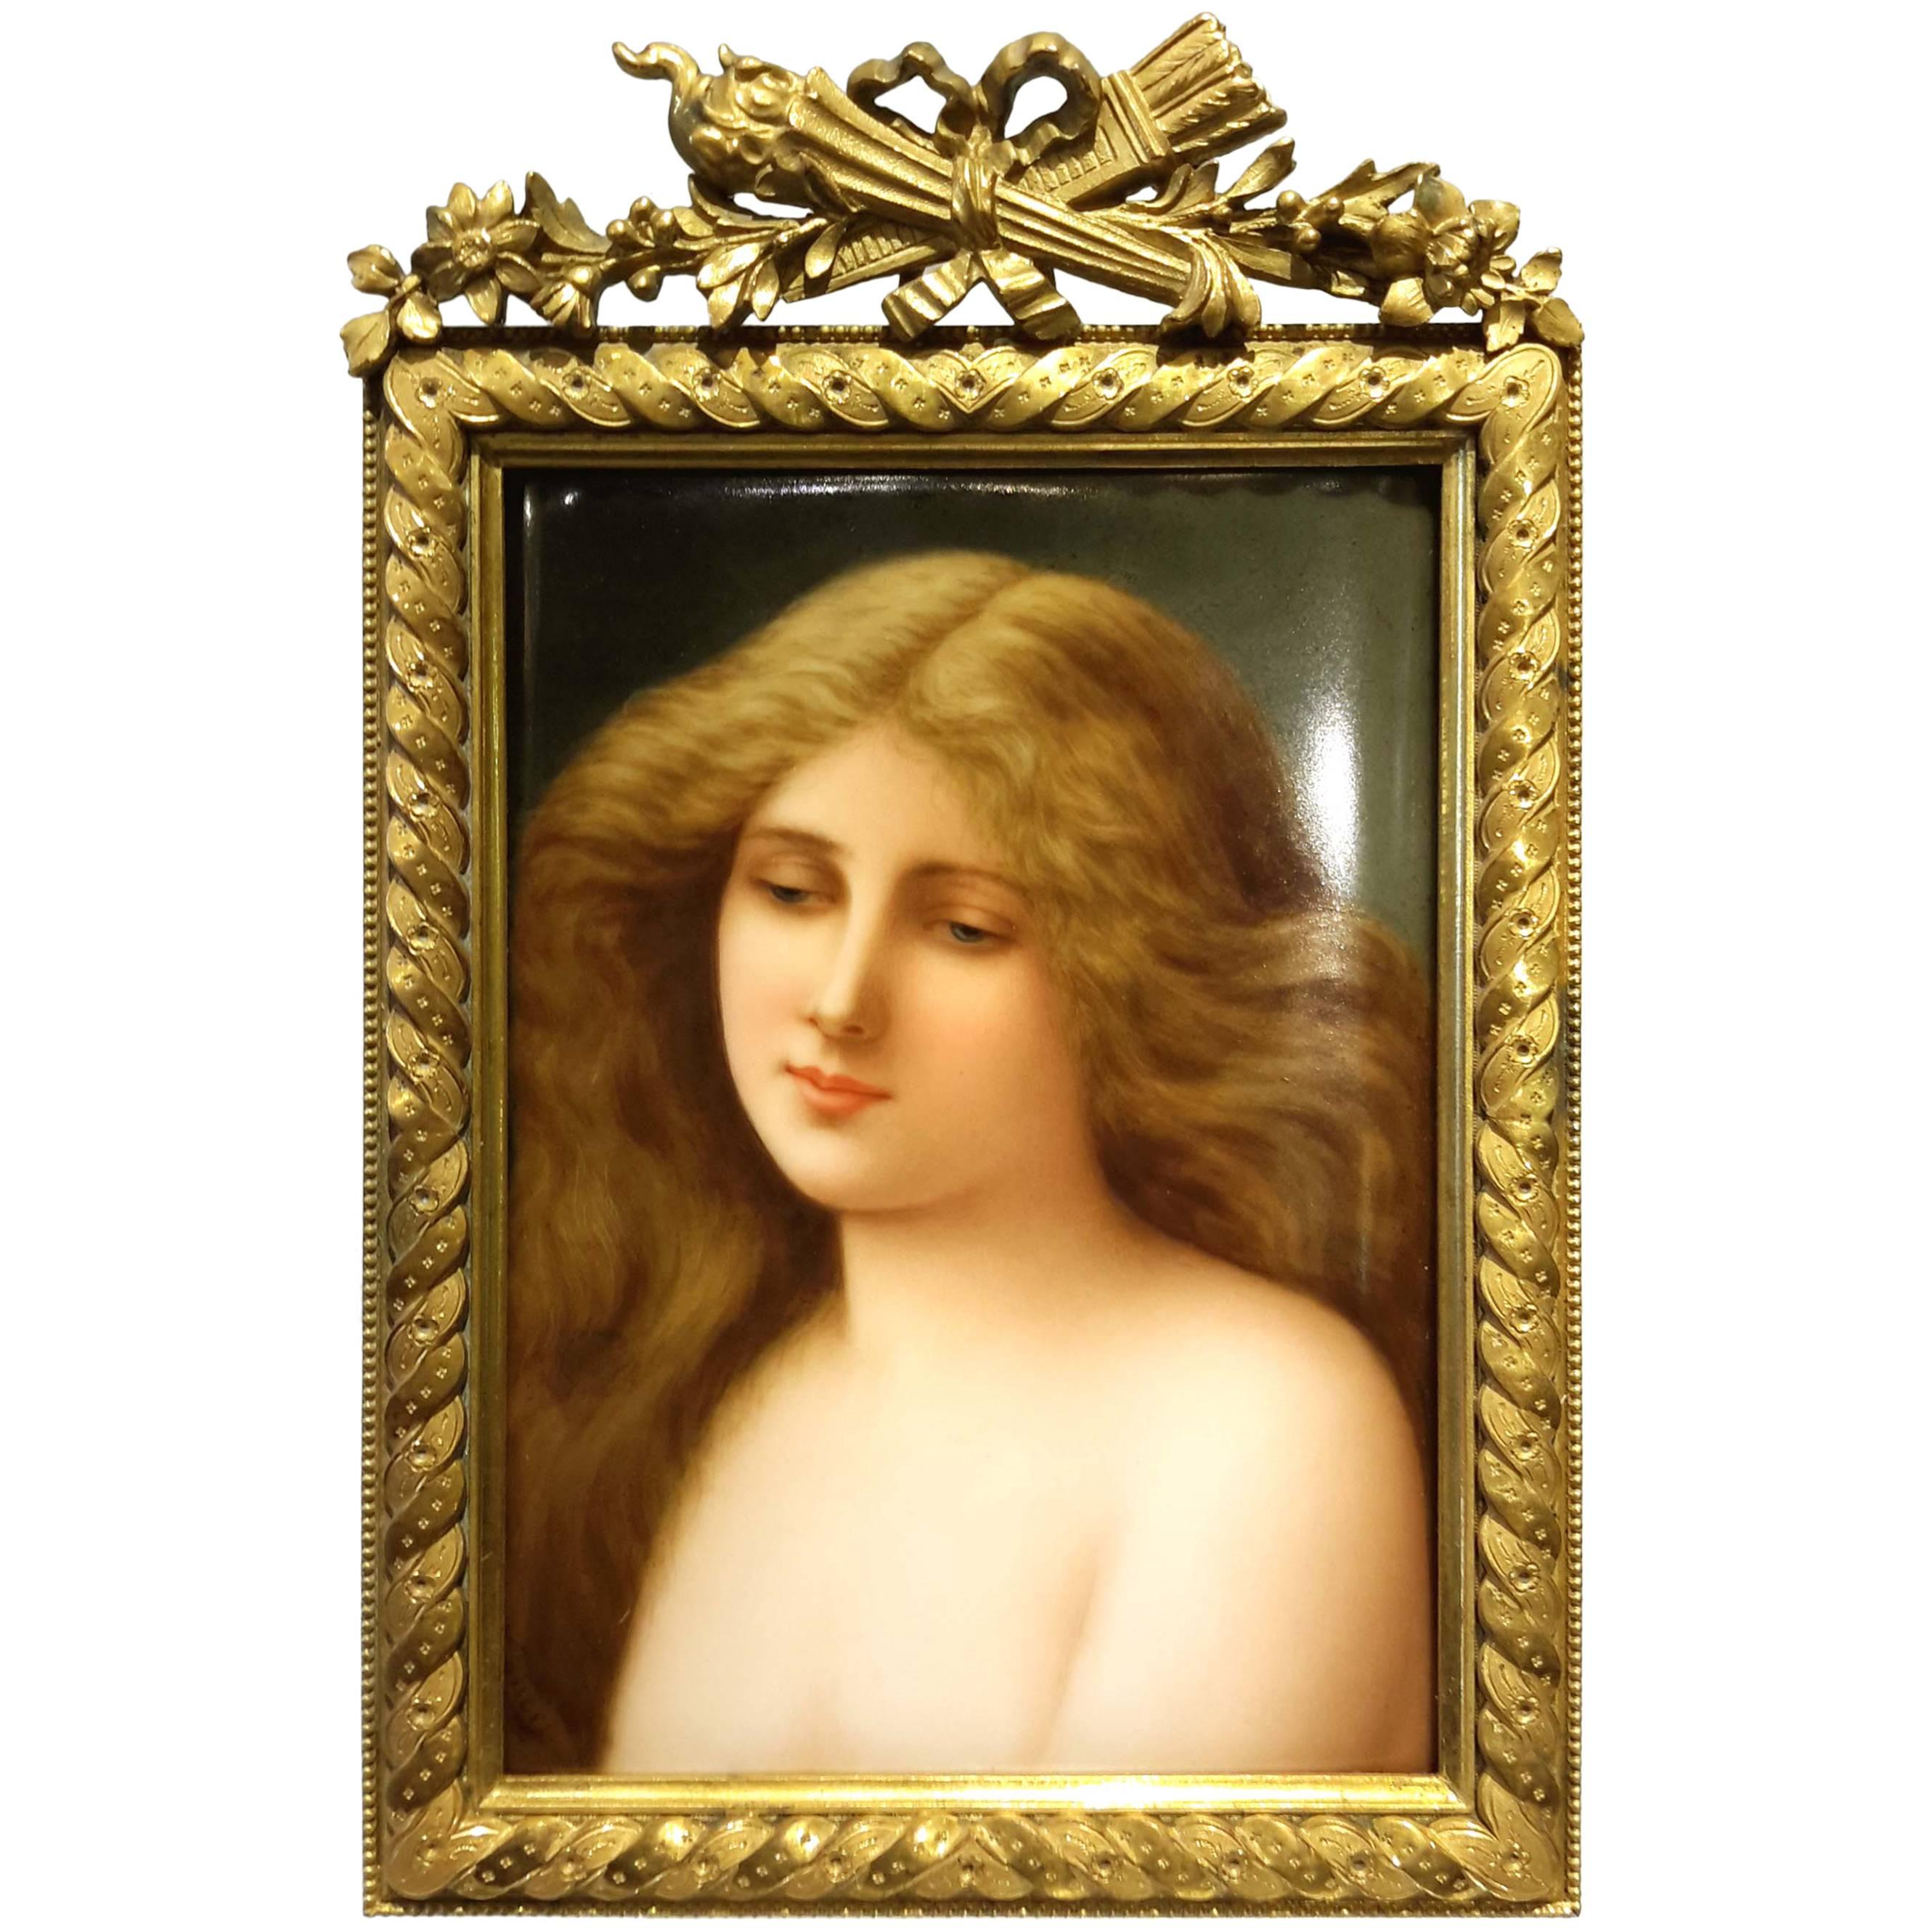 KPM Berlin Porcelain Plaque of Young Beauty, Signed Wagner, 19th Century